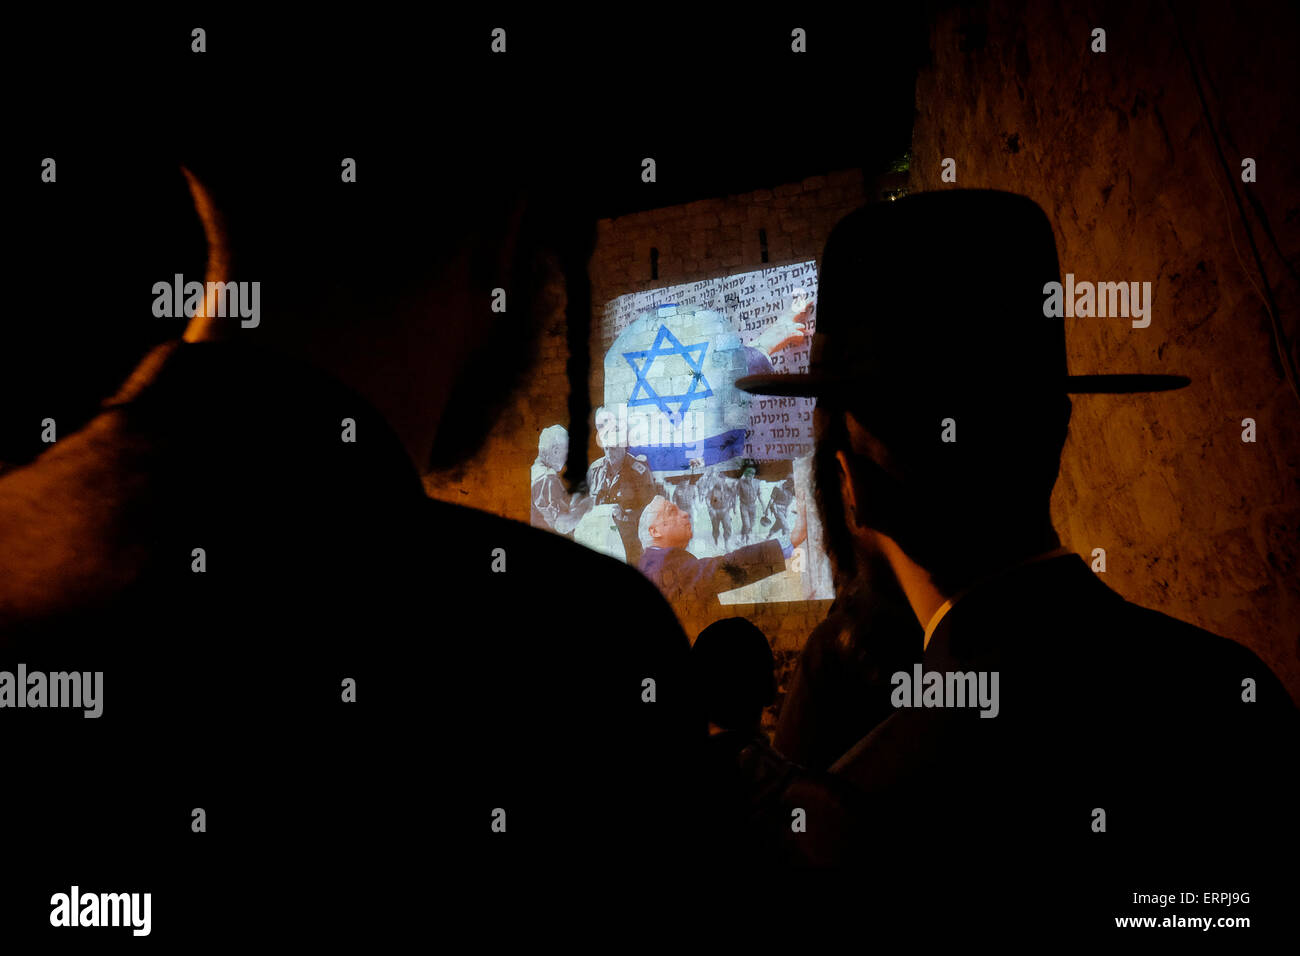 Jerusalem - ISRAEL 06 June 2015: Ultra Orthodox Jews watching a light and sound projection over ancient wall depicting the 11th Israeli Prime Minister Ariel Sharon praying in the Western Wall in the old city during The Jerusalem Festival of Lights in Israel on 06 June 2015. The festival is held annually around Jerusalem's old city with special effects illuminating historical sites. Stock Photo